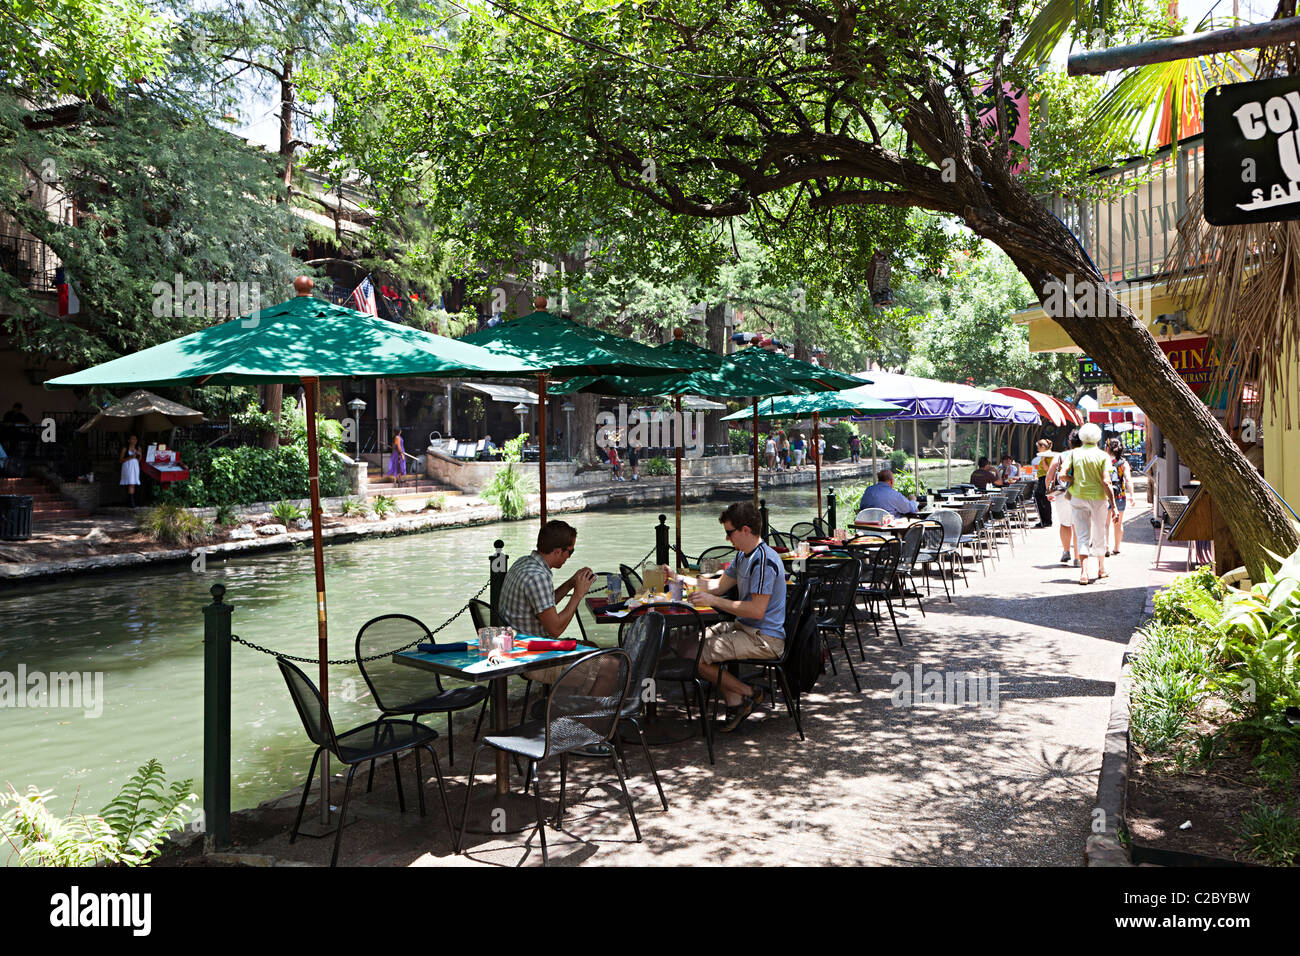 People eating on tables in shade on the Riverwalk San Antonio Texas USA Stock Photo